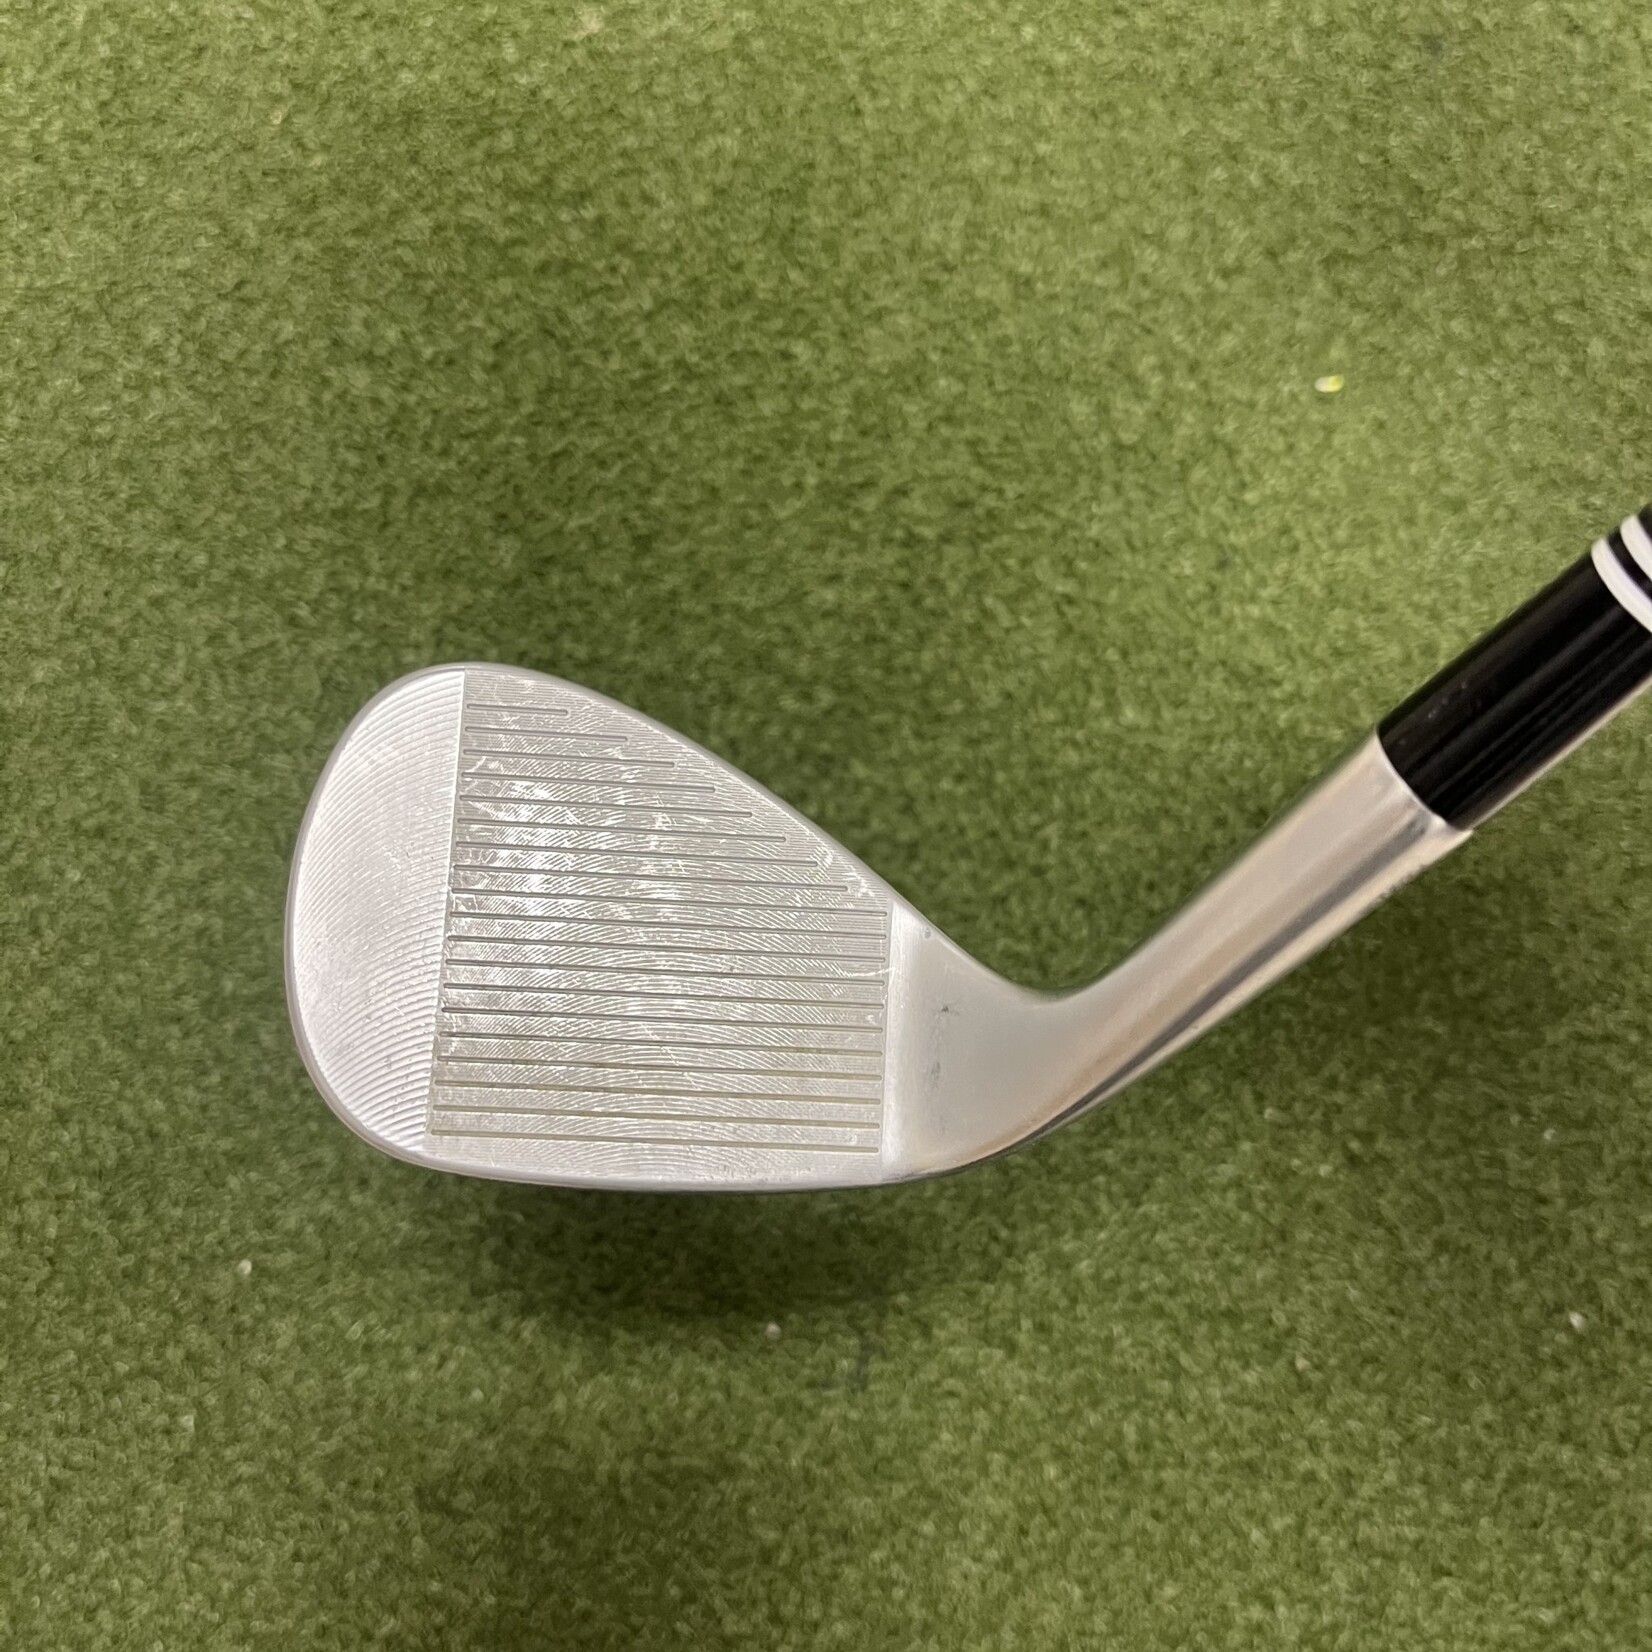 Cleveland (Pre-owned) Cleveland CBX Zipcore 56*12 Wedge (RH)